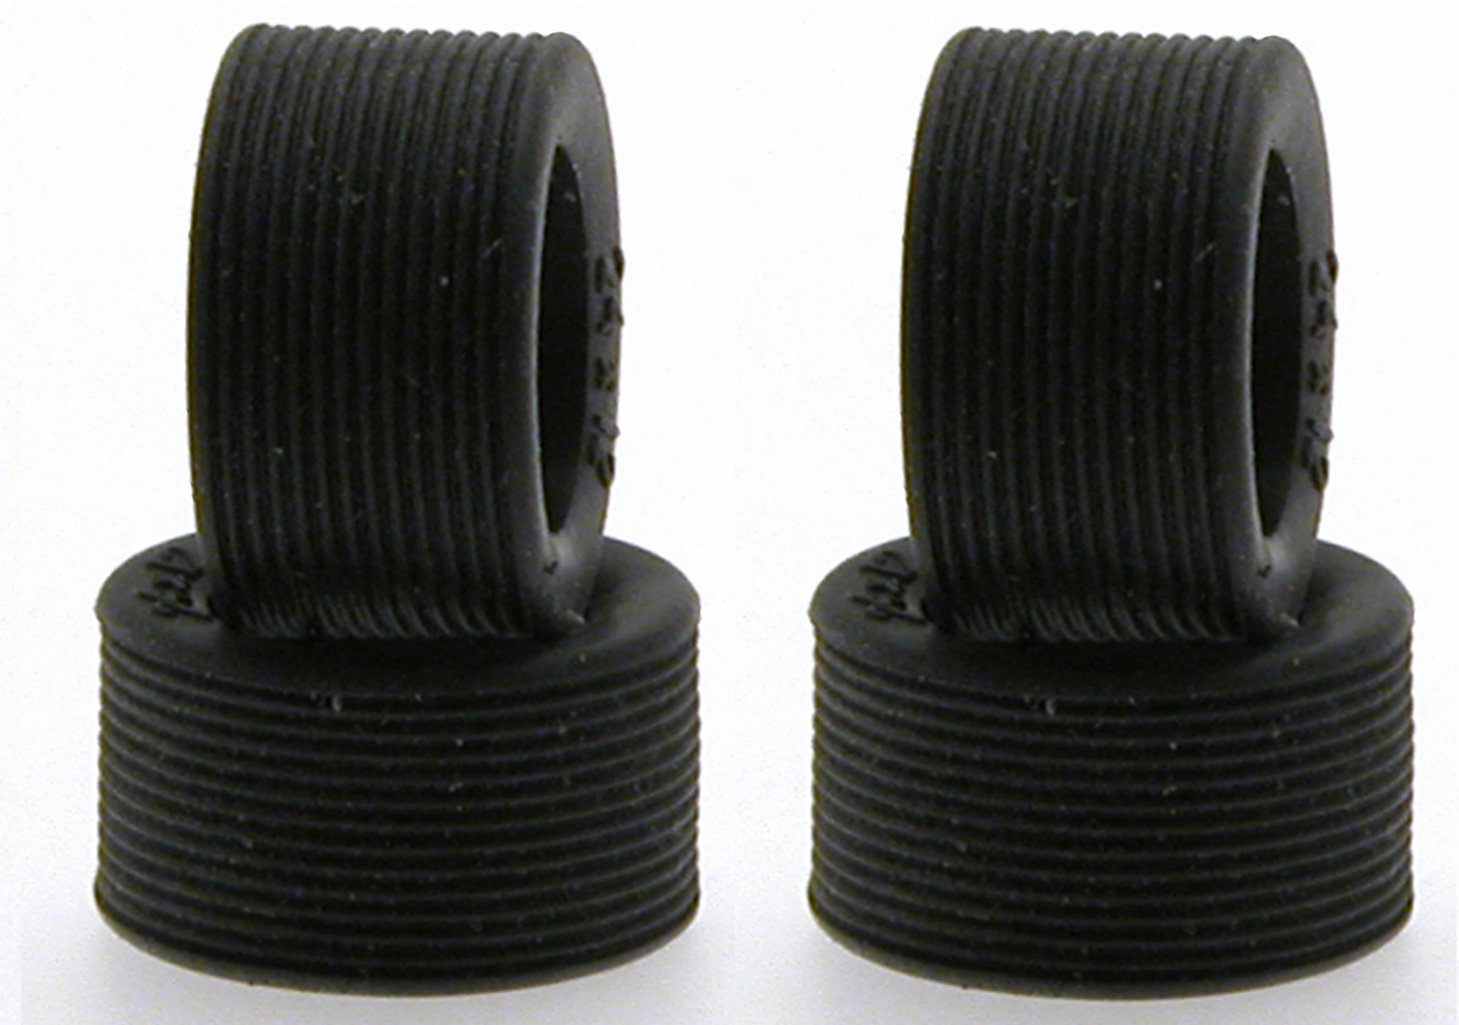 SC-4729 "RT Soft" Racing tires  Rubber for Profile hubs.